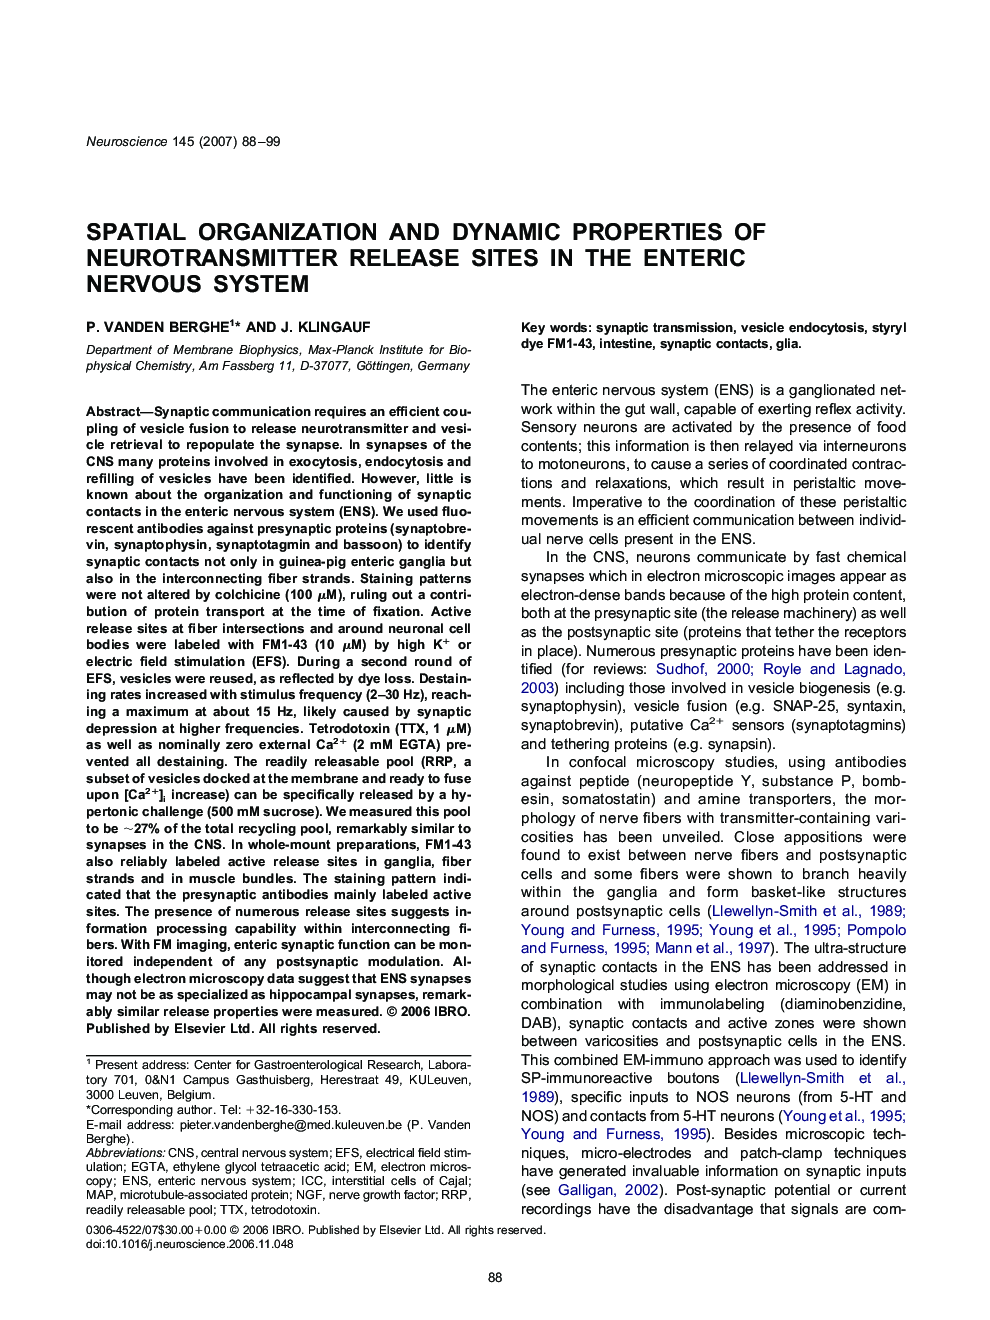 Spatial organization and dynamic properties of neurotransmitter release sites in the enteric nervous system